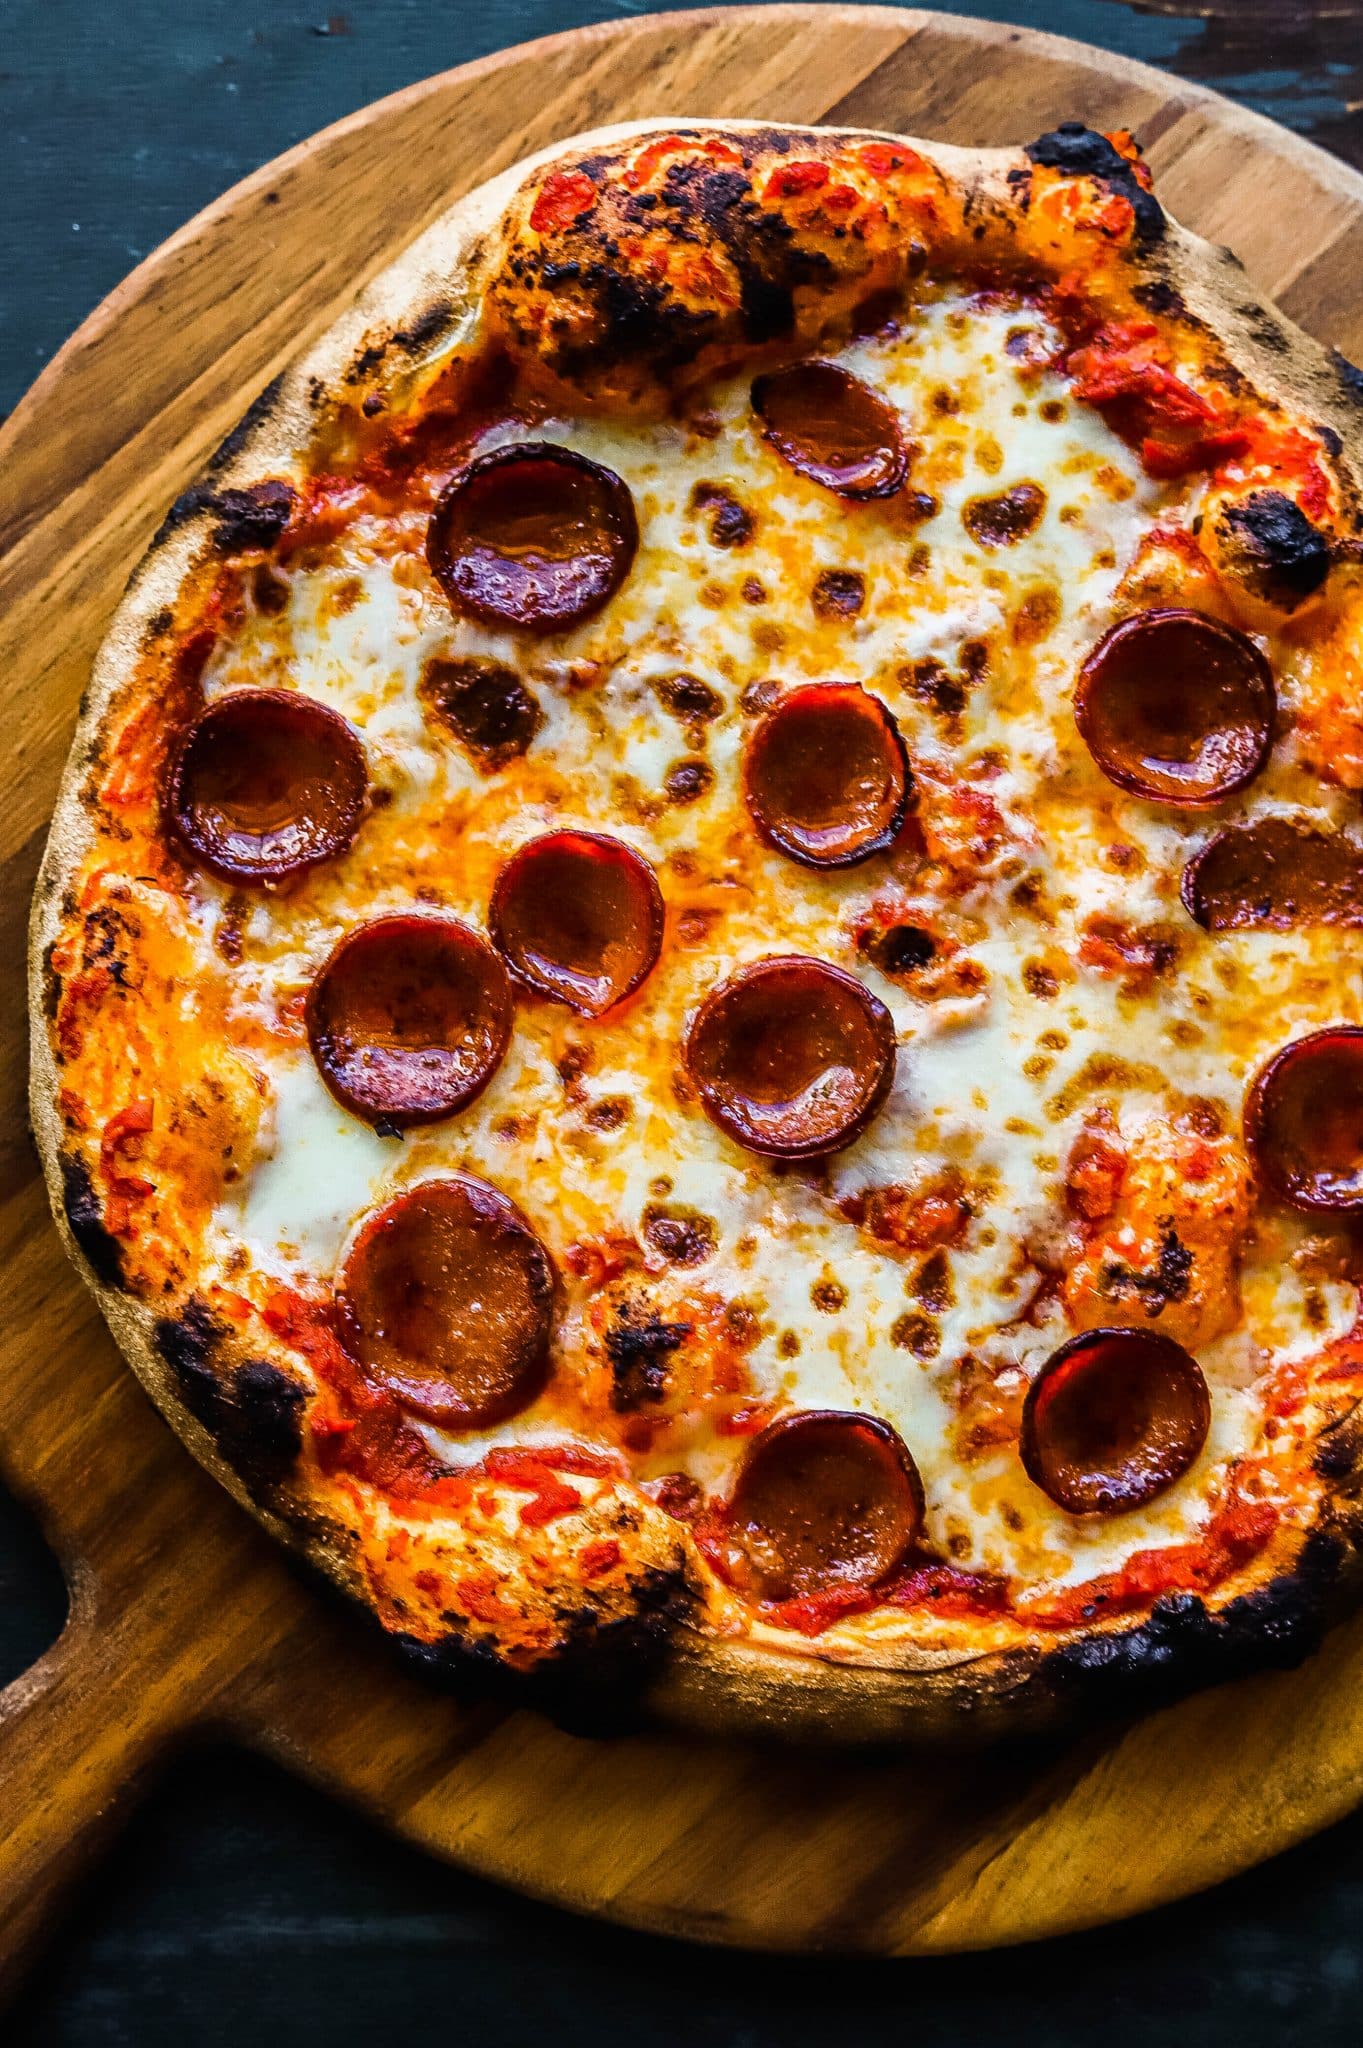 https://somuchfoodblog.com/wp-content/uploads/2022/02/same-day-pizza-dough7-scaled.jpg